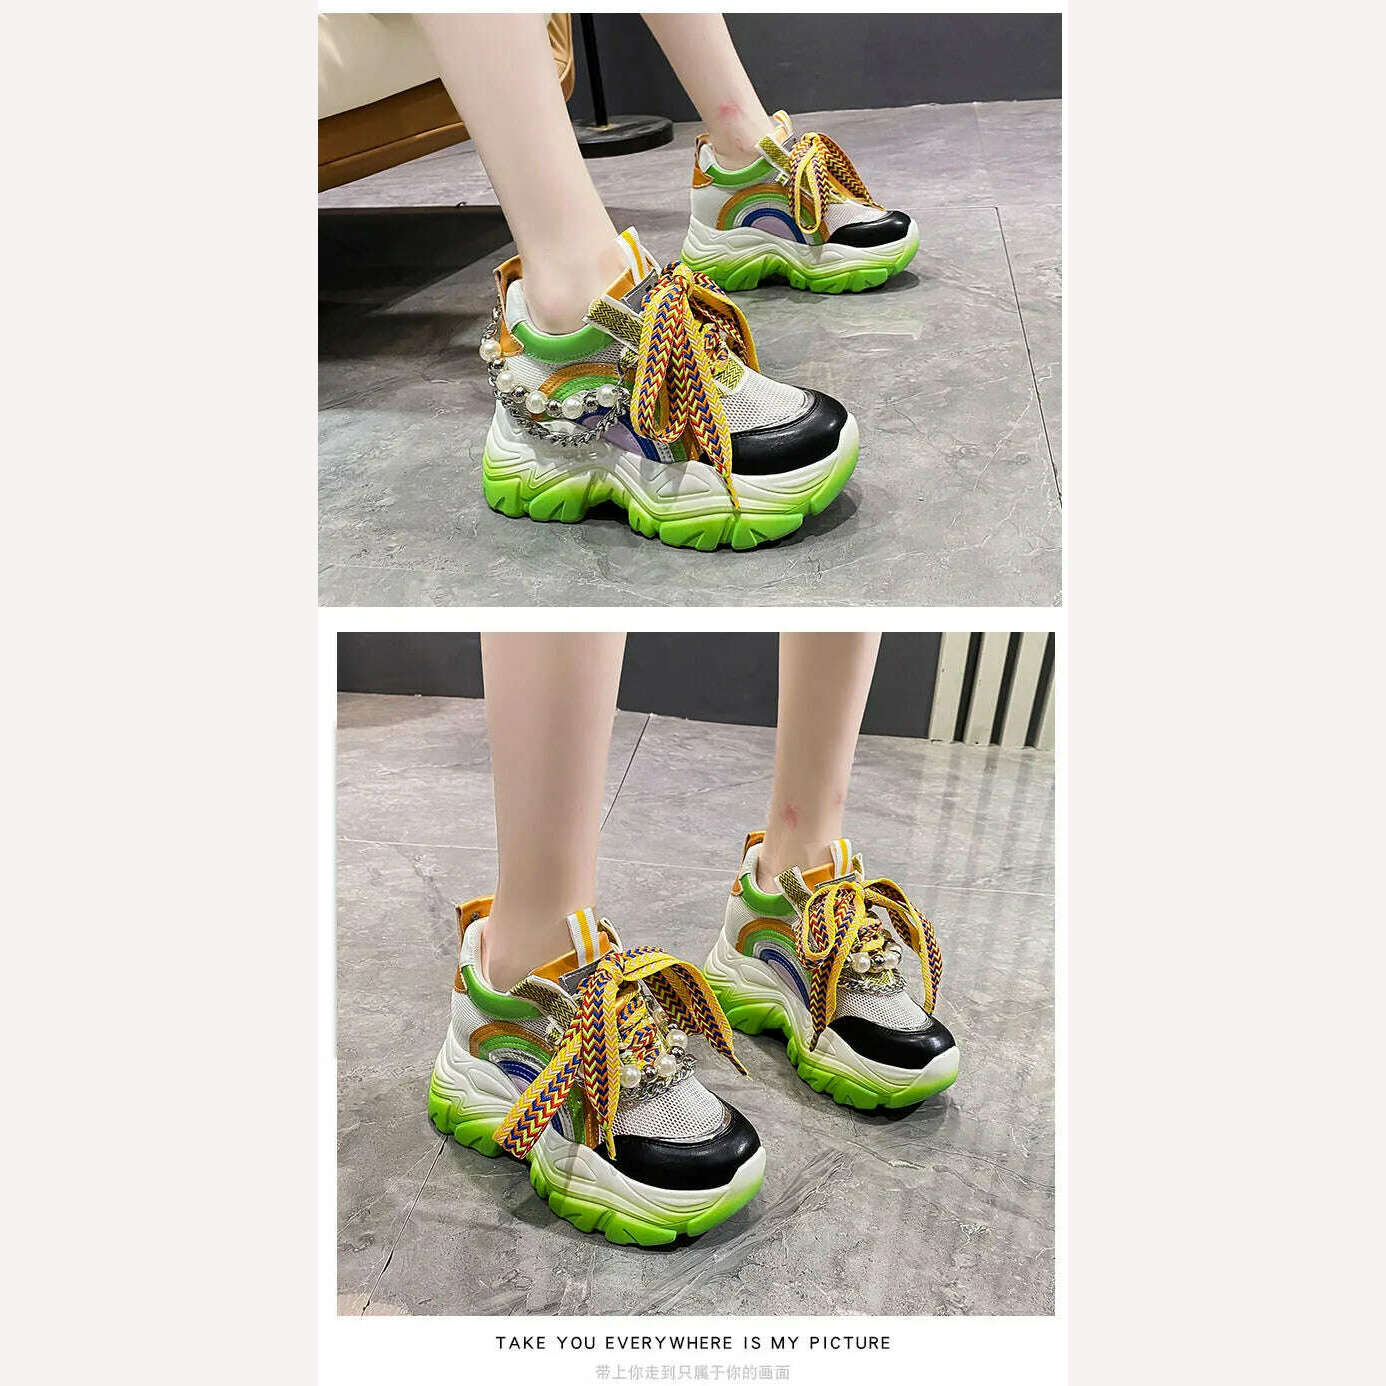 Patent Leather Ladies Casual Shoes Fashion String Bead Chain Girls Chunky Sneakers 8.5cm Heel Thick Sole Women&#39;s Platform Shoes, KIMLUD Women's Clothes